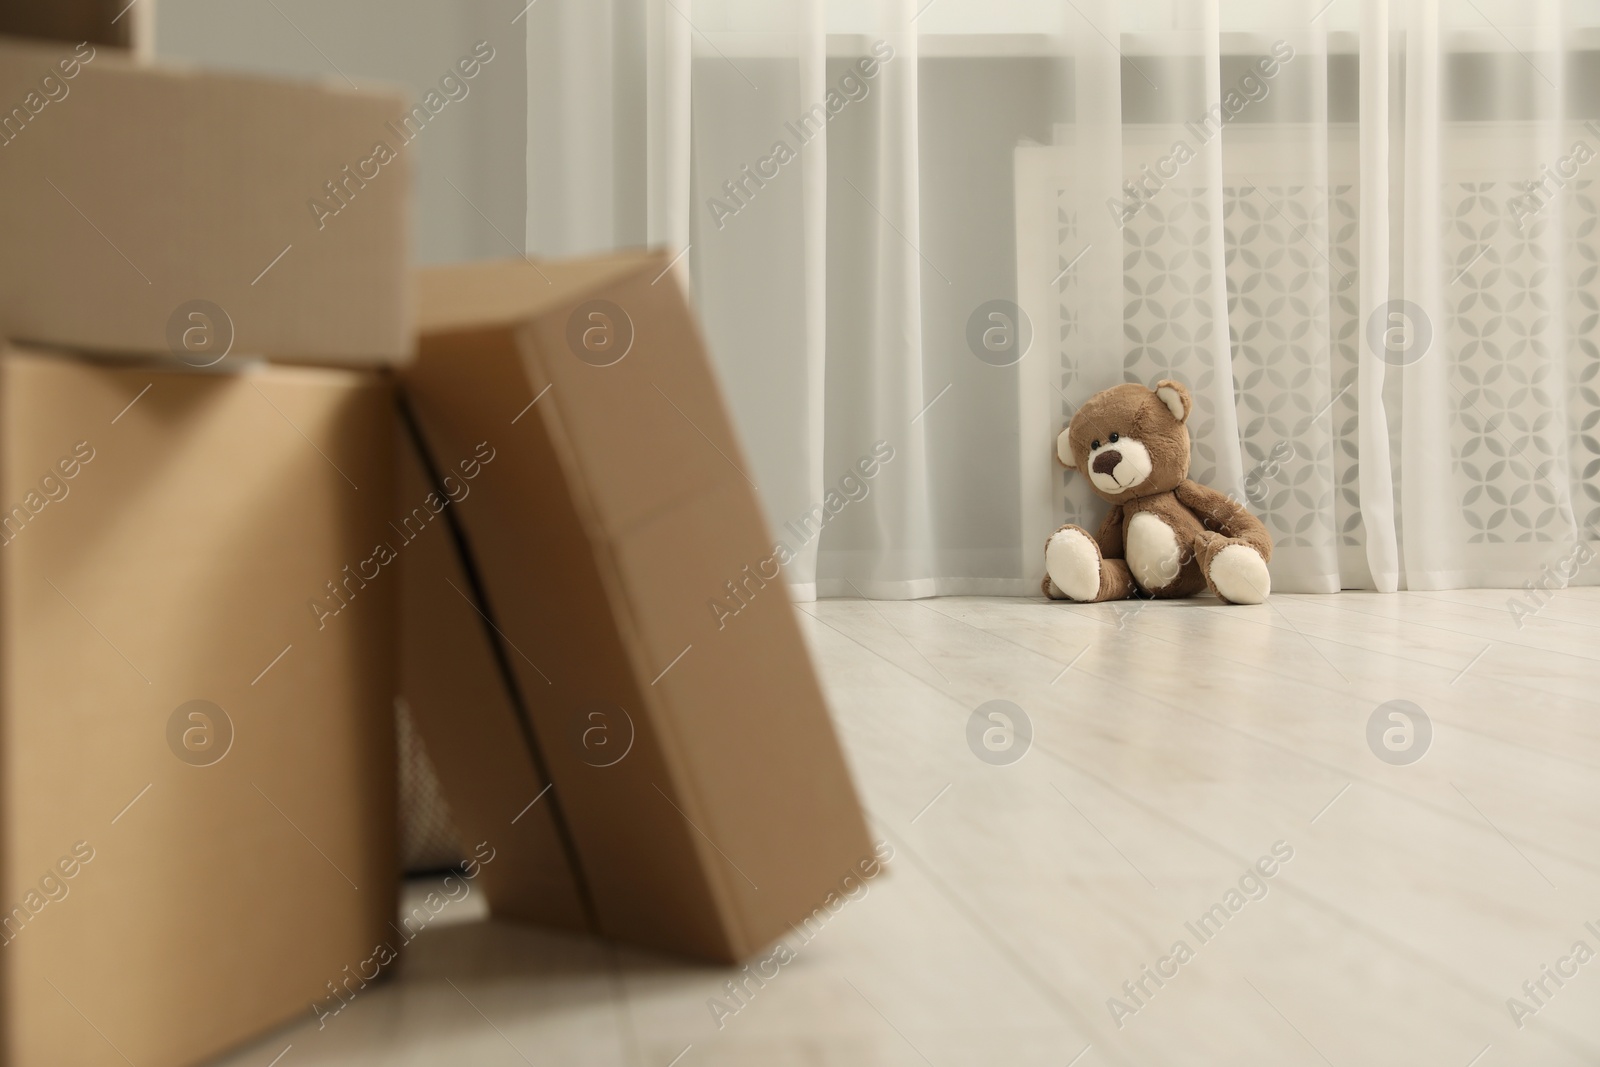 Photo of Cute lonely teddy bear on floor near boxes indoors